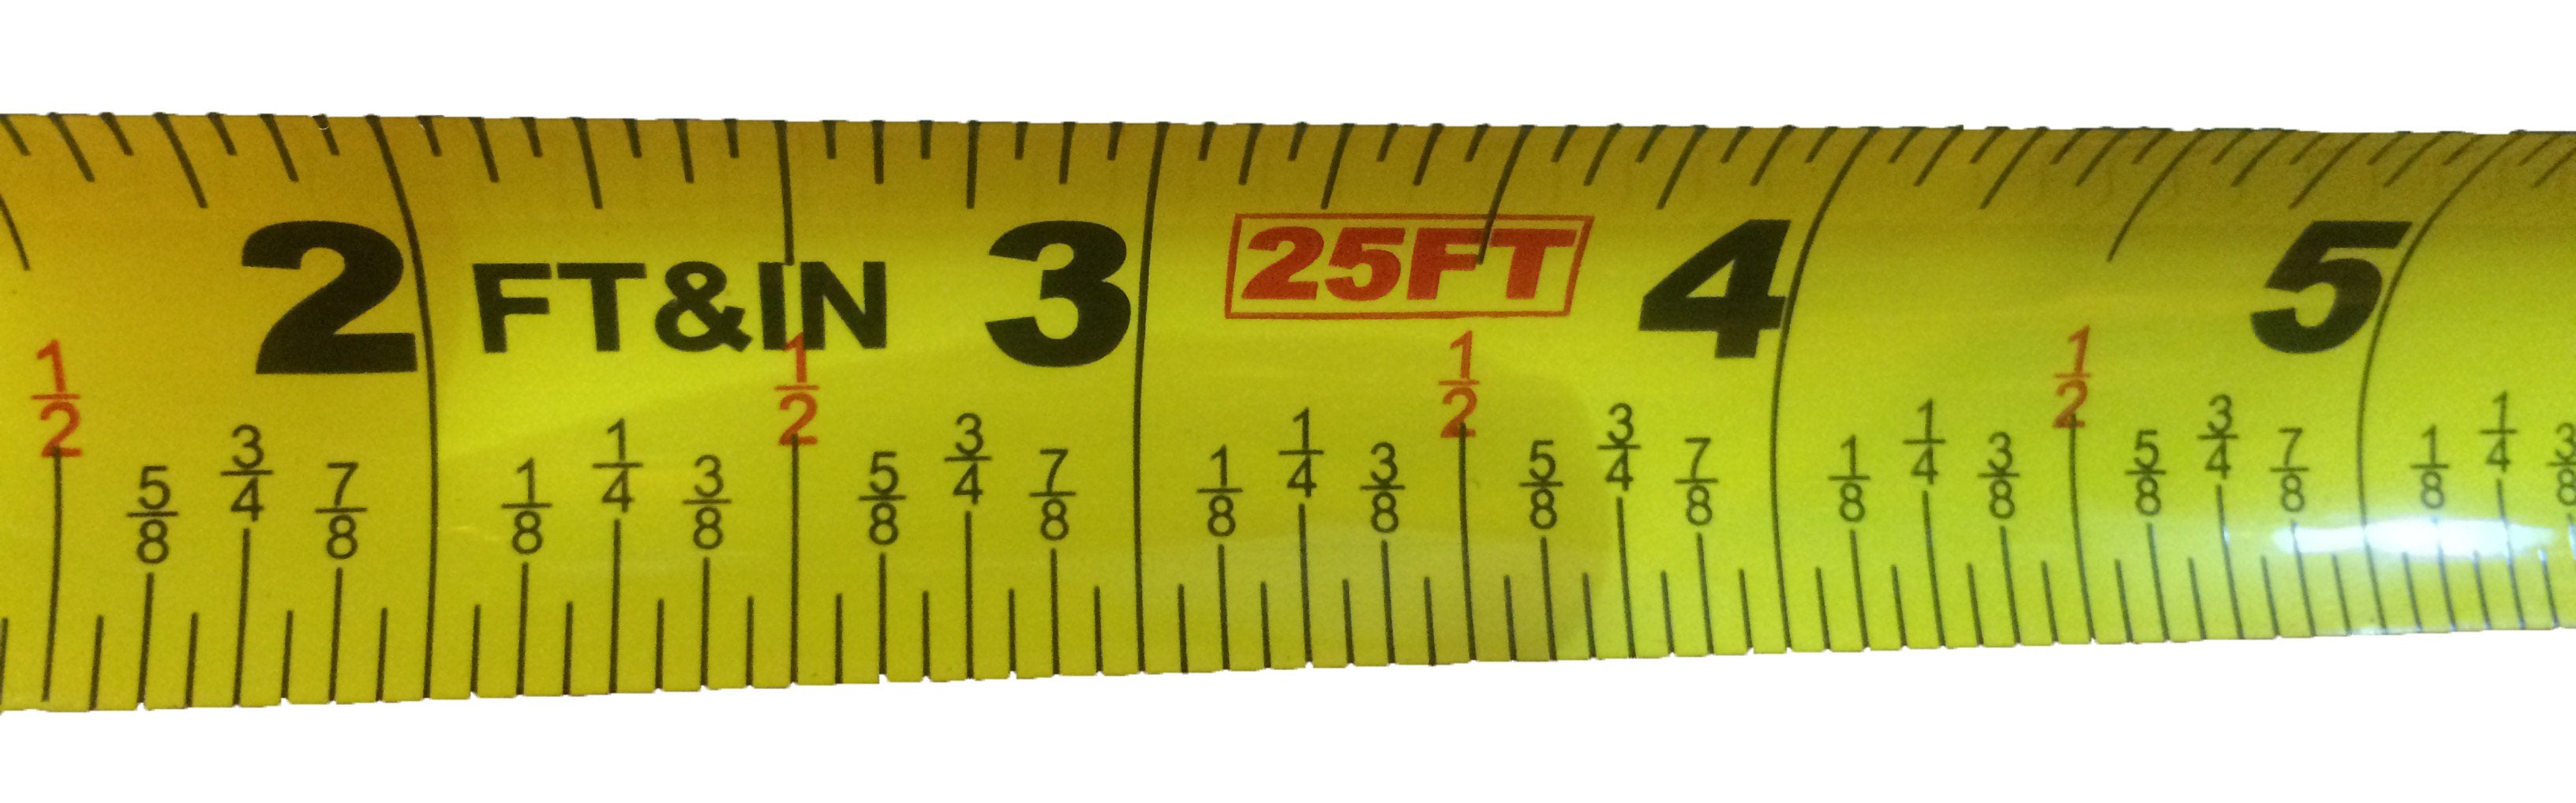 Shelter Tools 25-ft Tape Measure